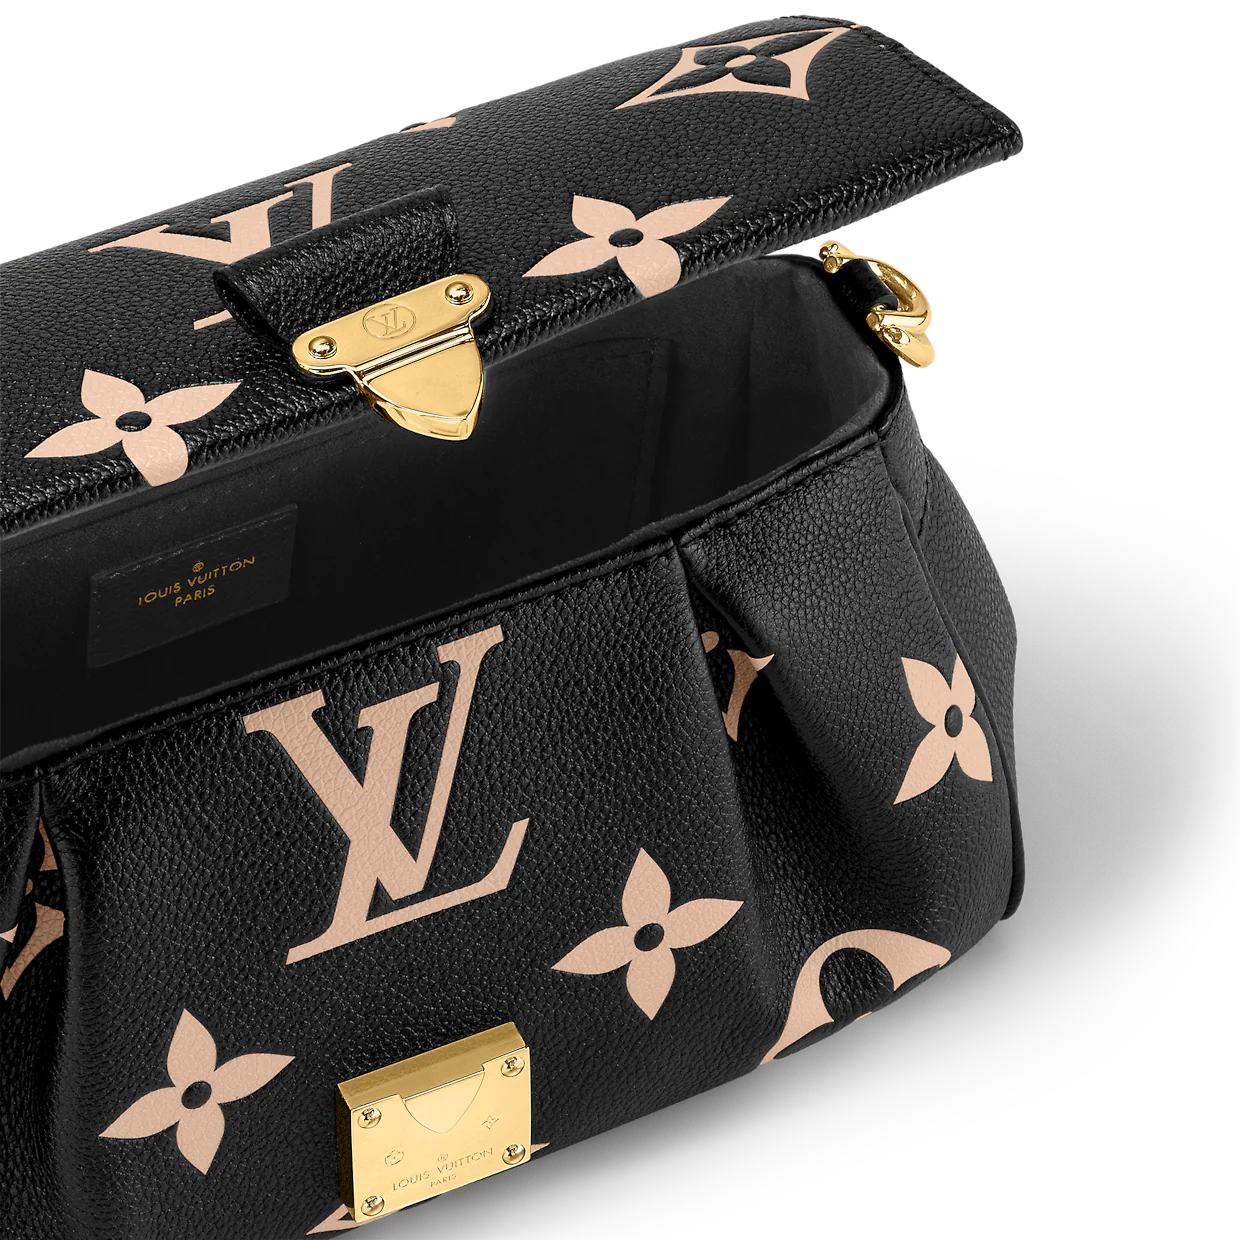 Louis Vuitton Marylin bag by Marc Jacobs Takashi Murakami edition  multicolored monogram 2008  For Sure Vintage